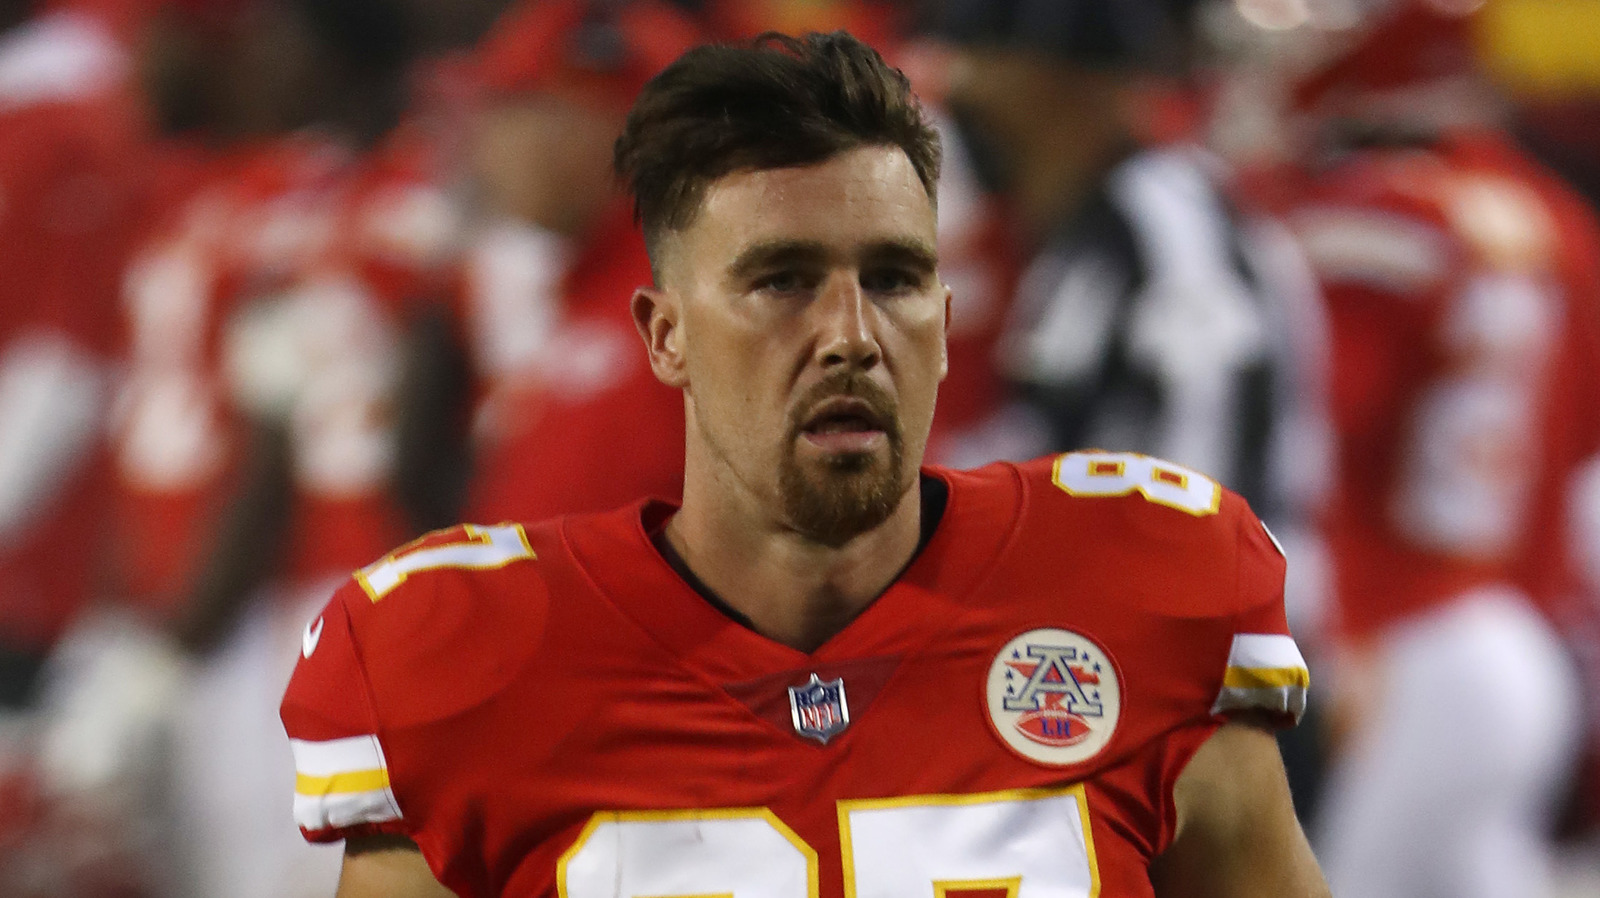 Travis Kelce How Much Is The Tight End Worth?